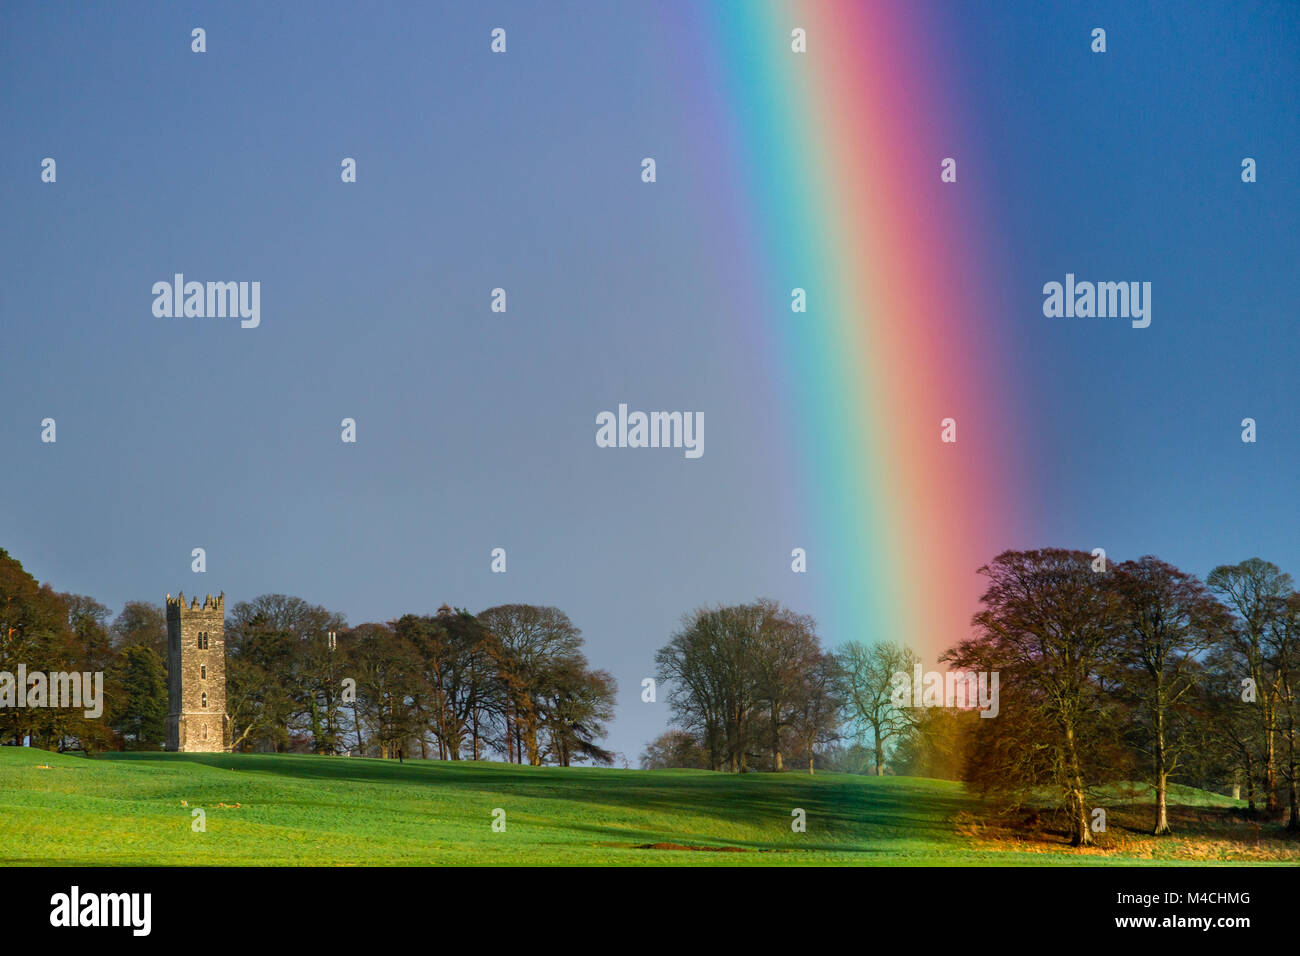 Beautiful rainbow over Tyrconnell Tower at Carton House Golf Course in Maynooth, co, Kildare, Ireland Stock Photo